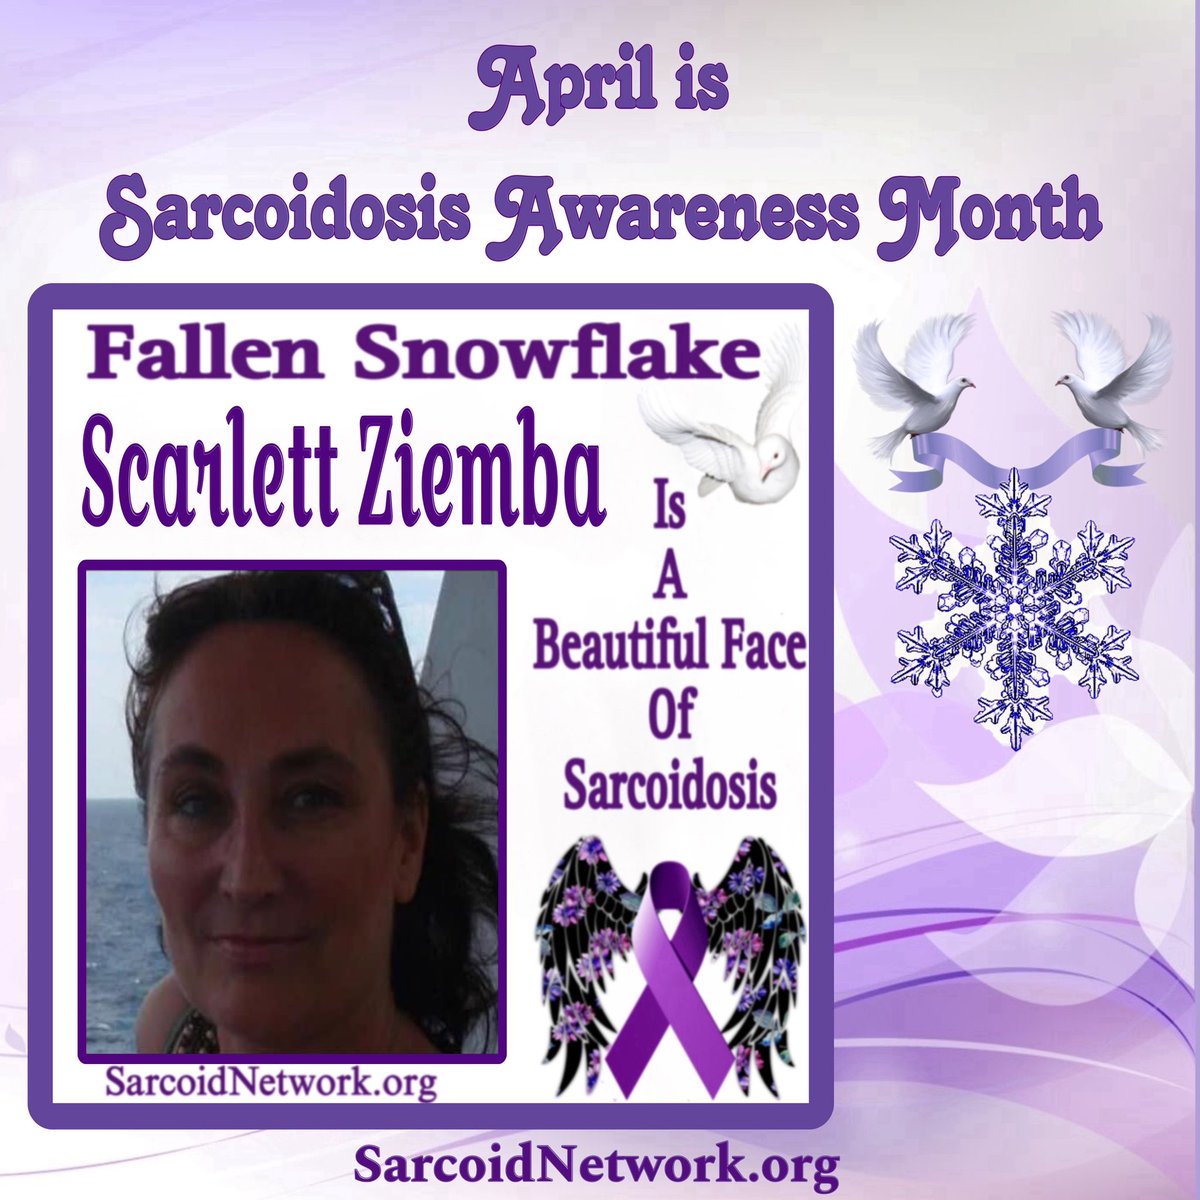 This is our Sarcoidosis Sister Fallen Snowflake Scarlett Ziemba and she is a Beautiful Face of Sarcoidosis!💜 #Sarcoidosis #raredisease #preciousmemories #patientadvocate #sarcoidosisadvocate #beautifulfacesofsarcoidosis #sarcoidosisawarenessmonth